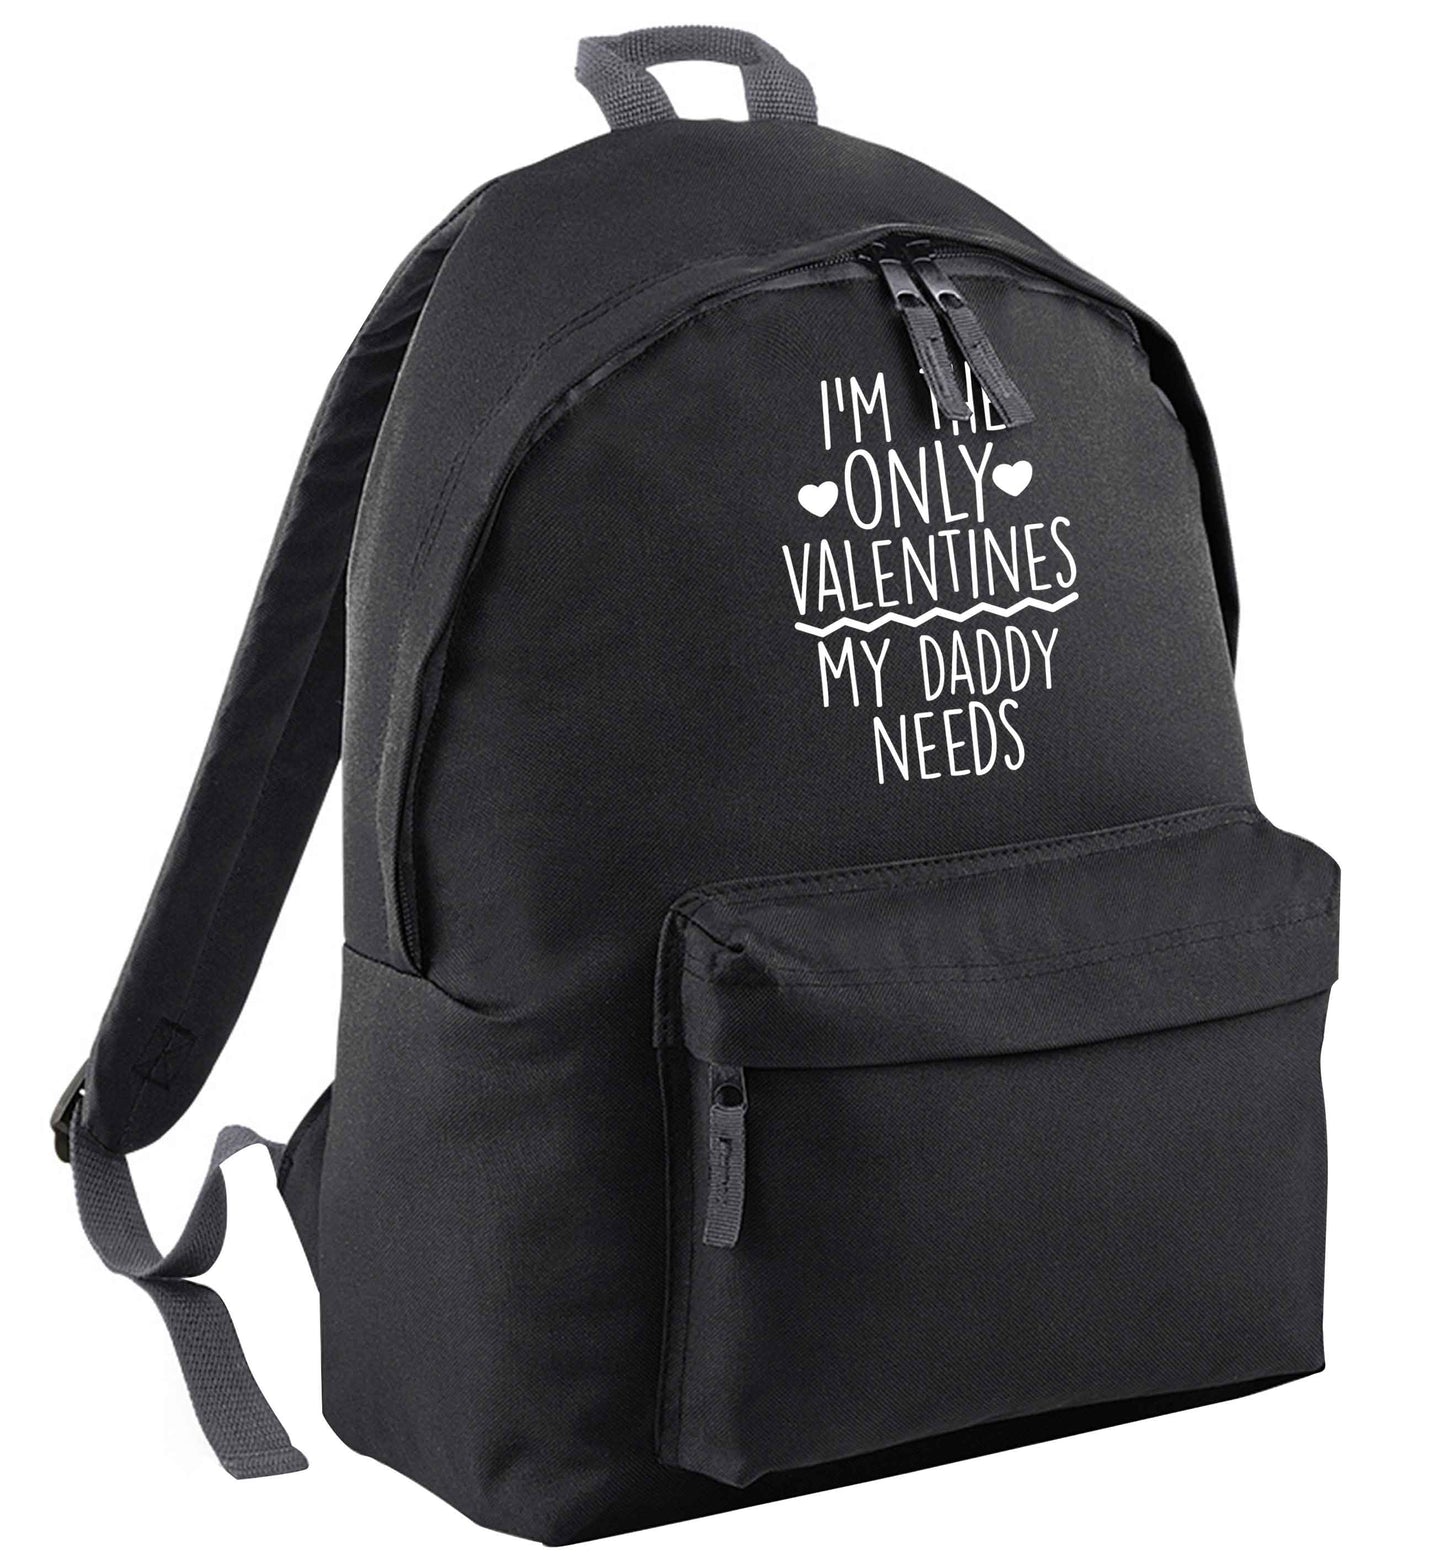 I'm the only valentines my daddy needs | Adults backpack